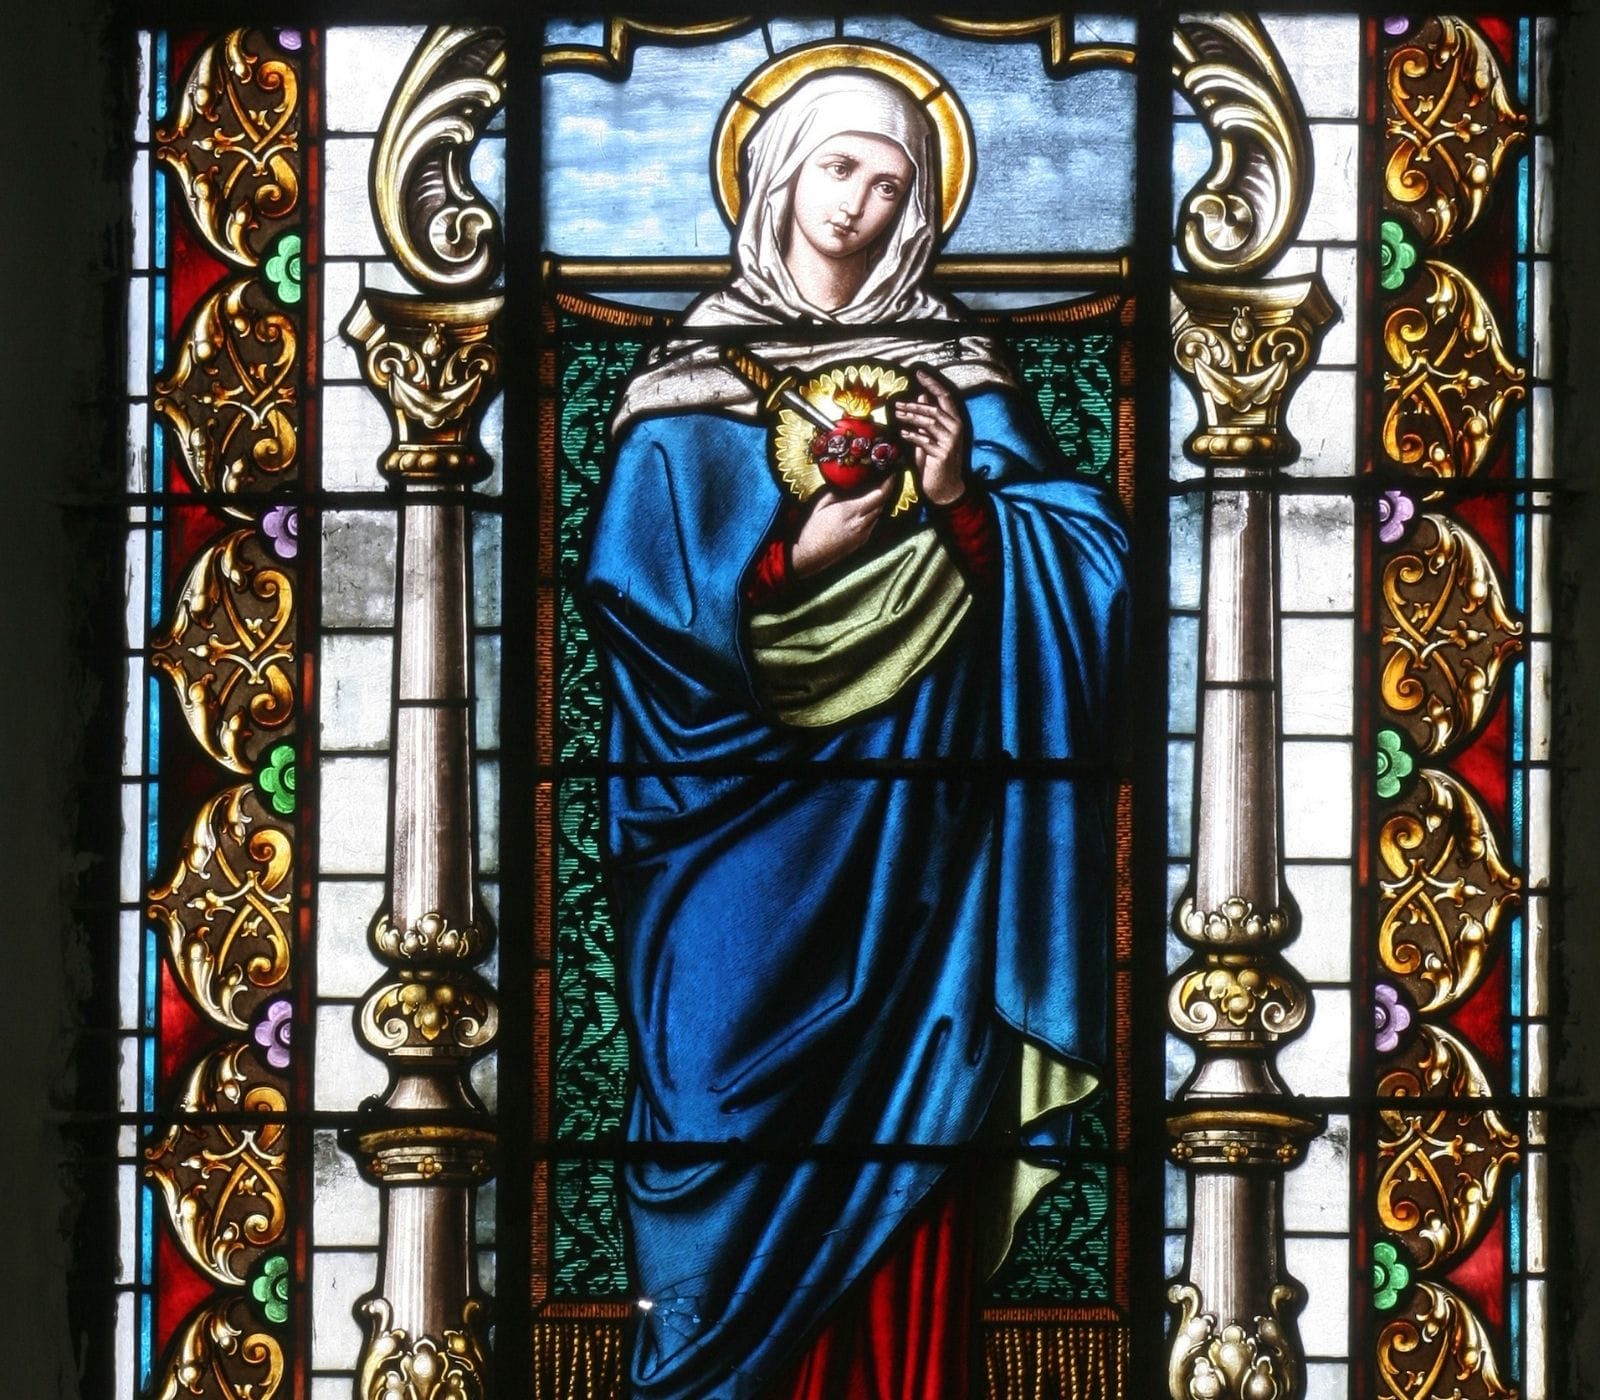 Immaculate heart of Mary